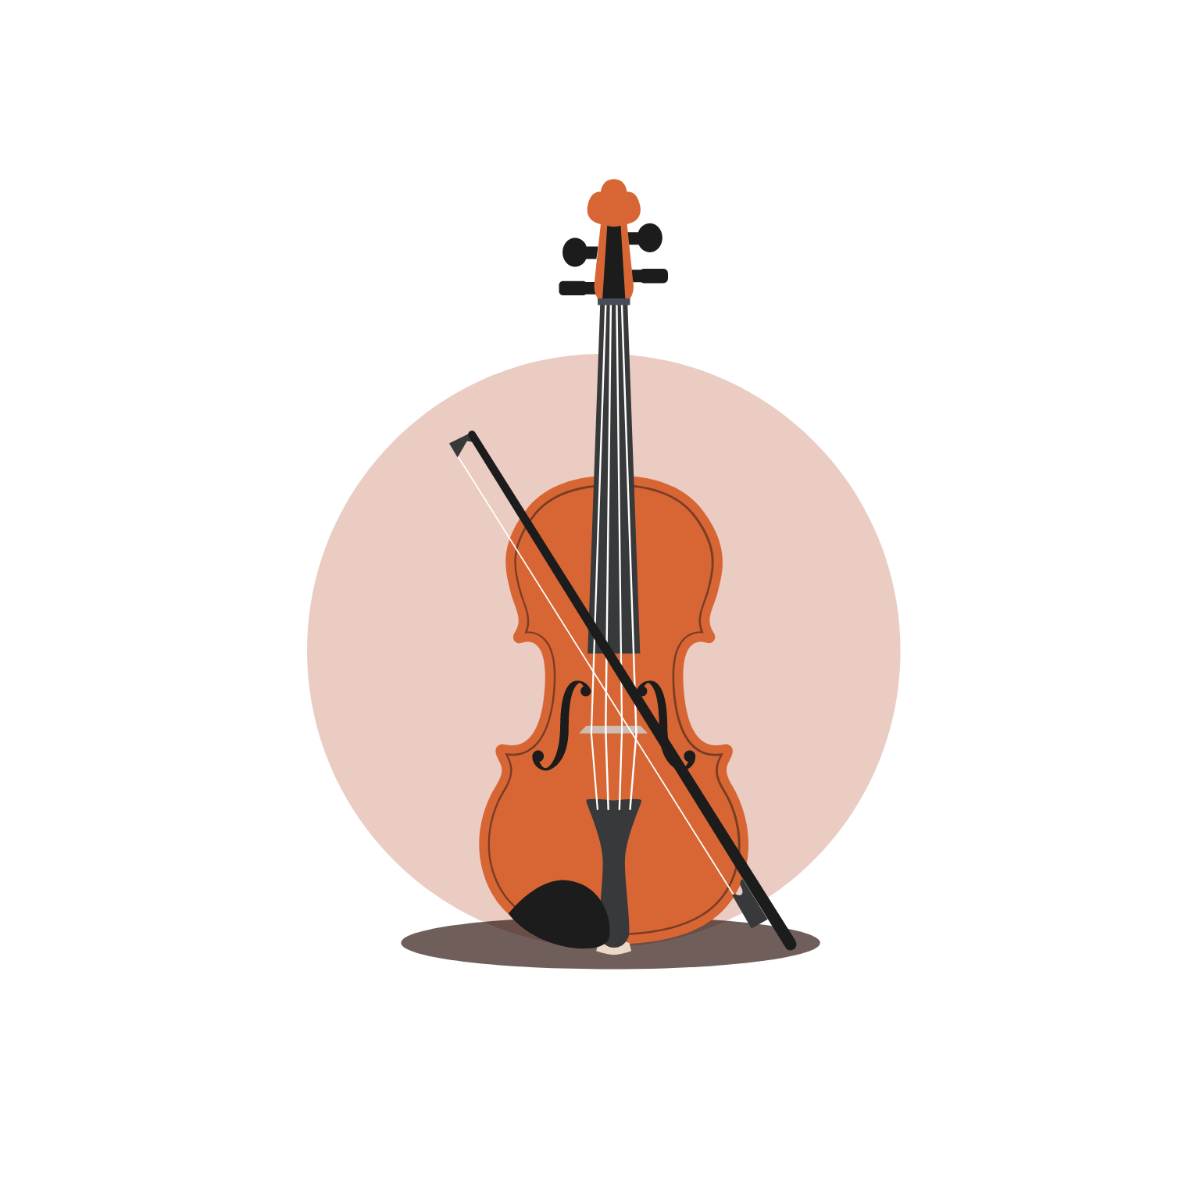 Free Musical Instrument Vector